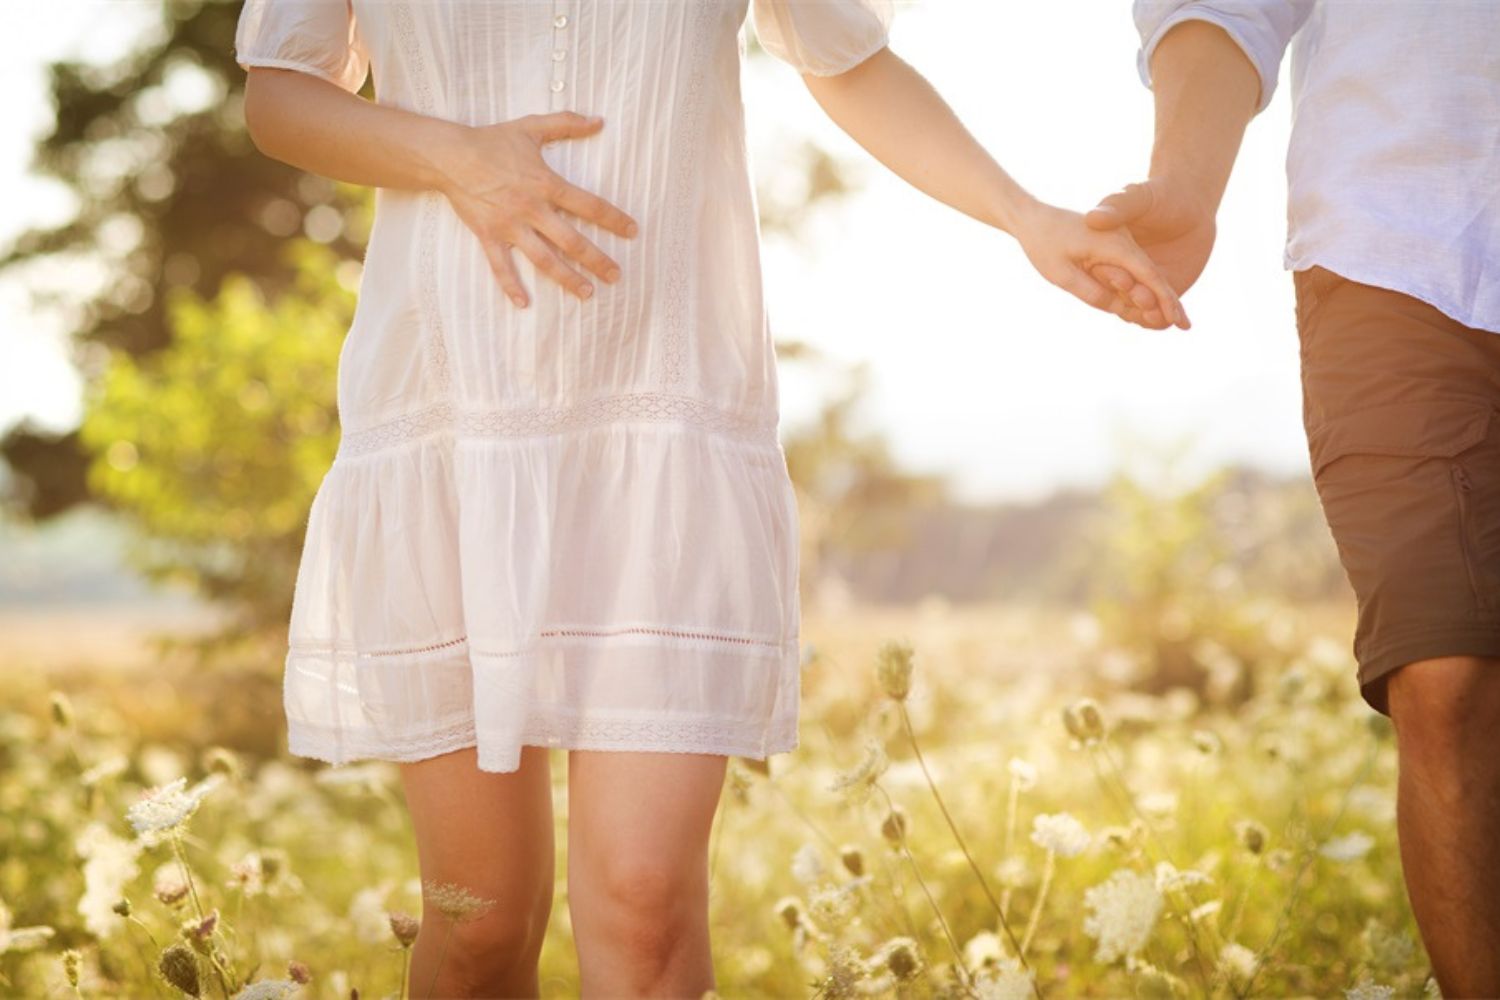 couple maternity photo of walking together by holding hands